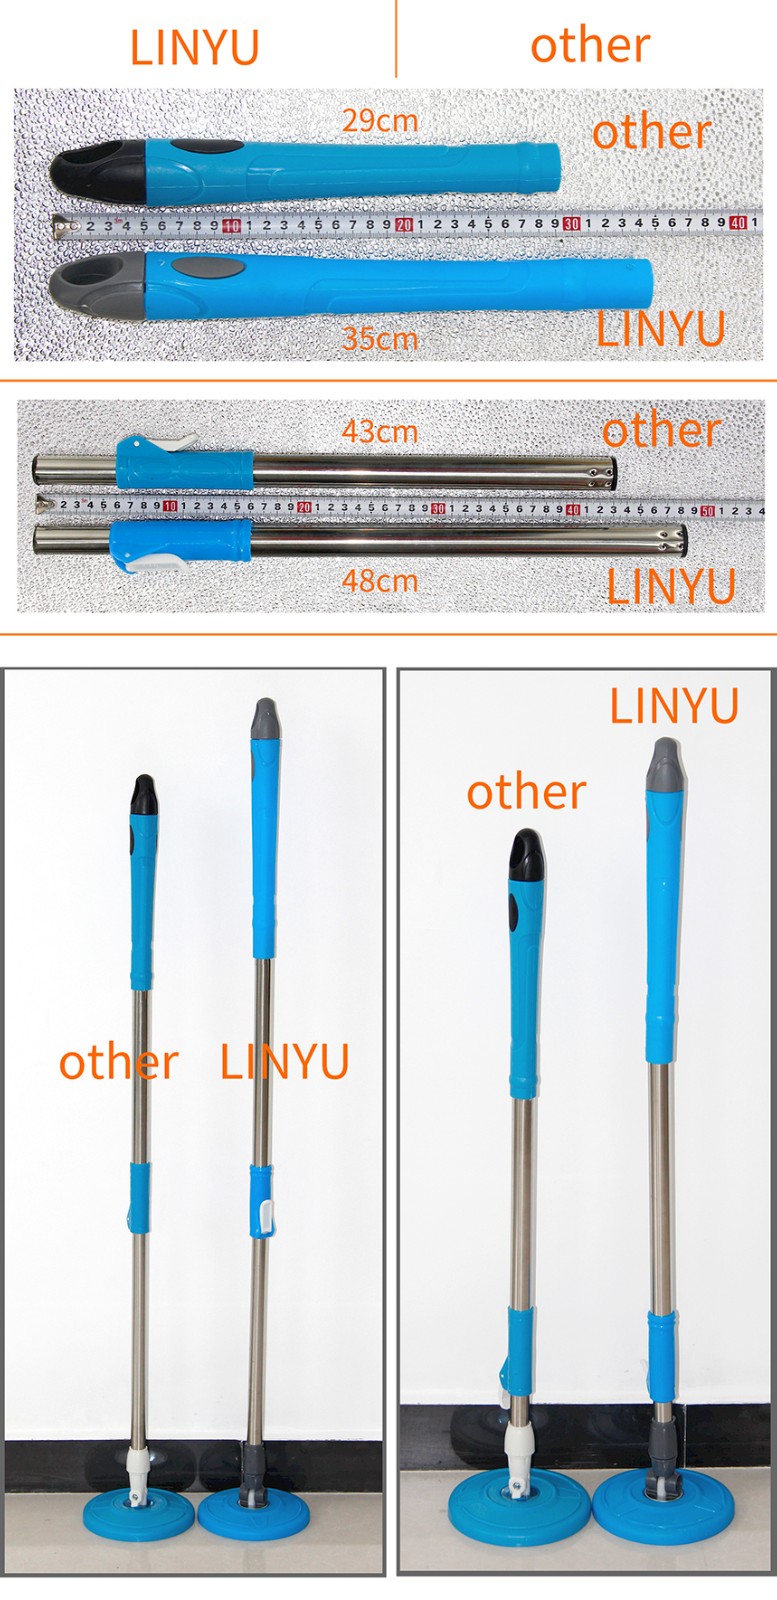 Why choose Lin Yu's mop? The advantage of the mop!